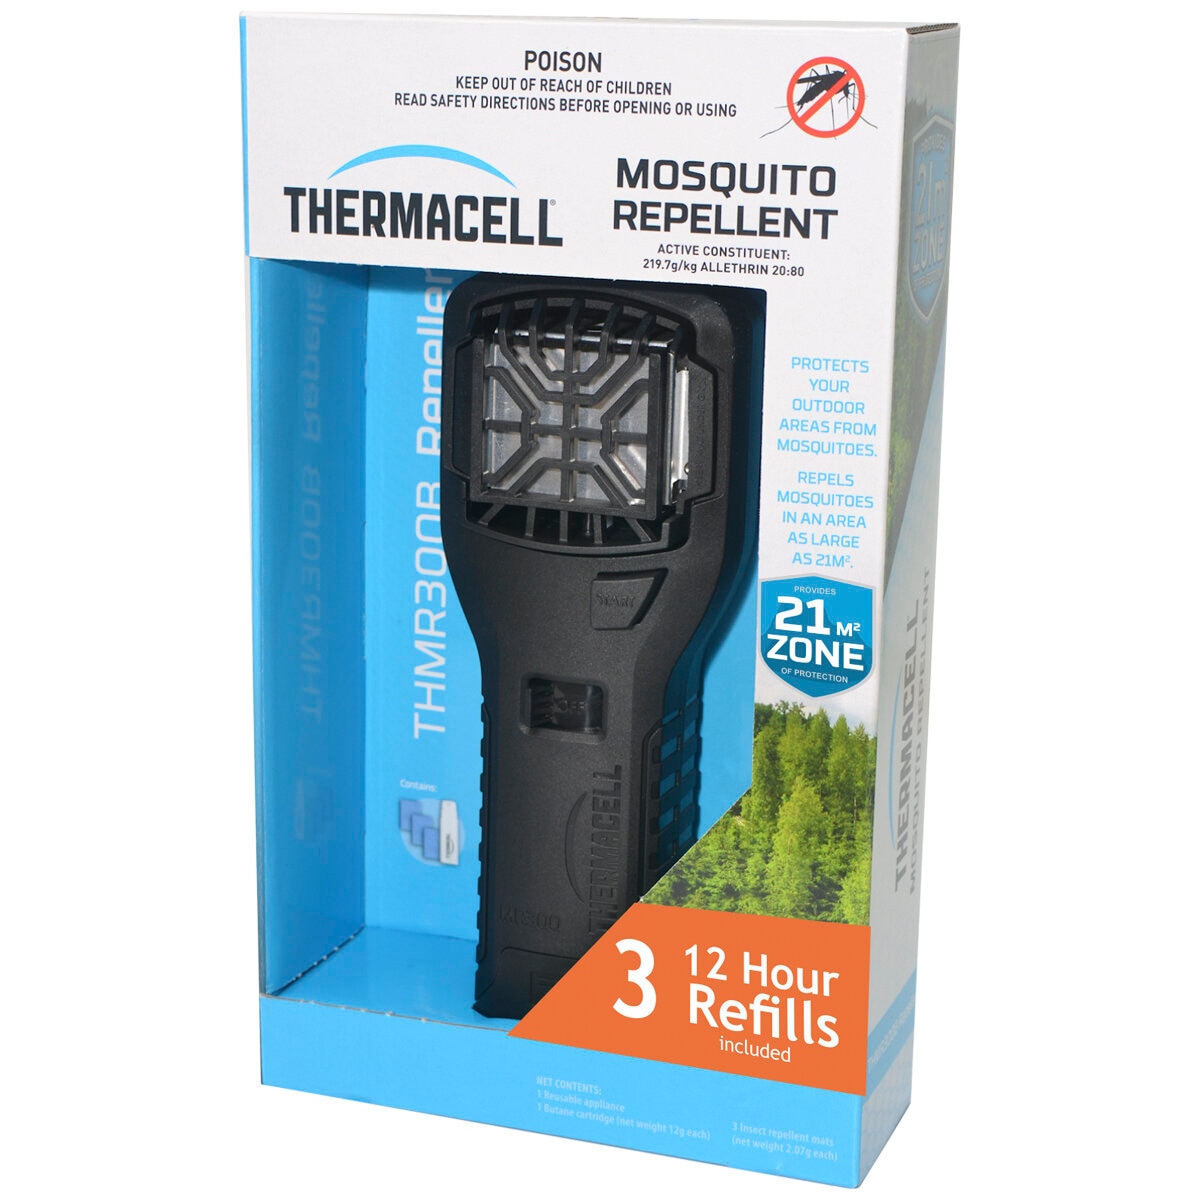 Thermacell Portable Mosquito Repeller with 3 Refills